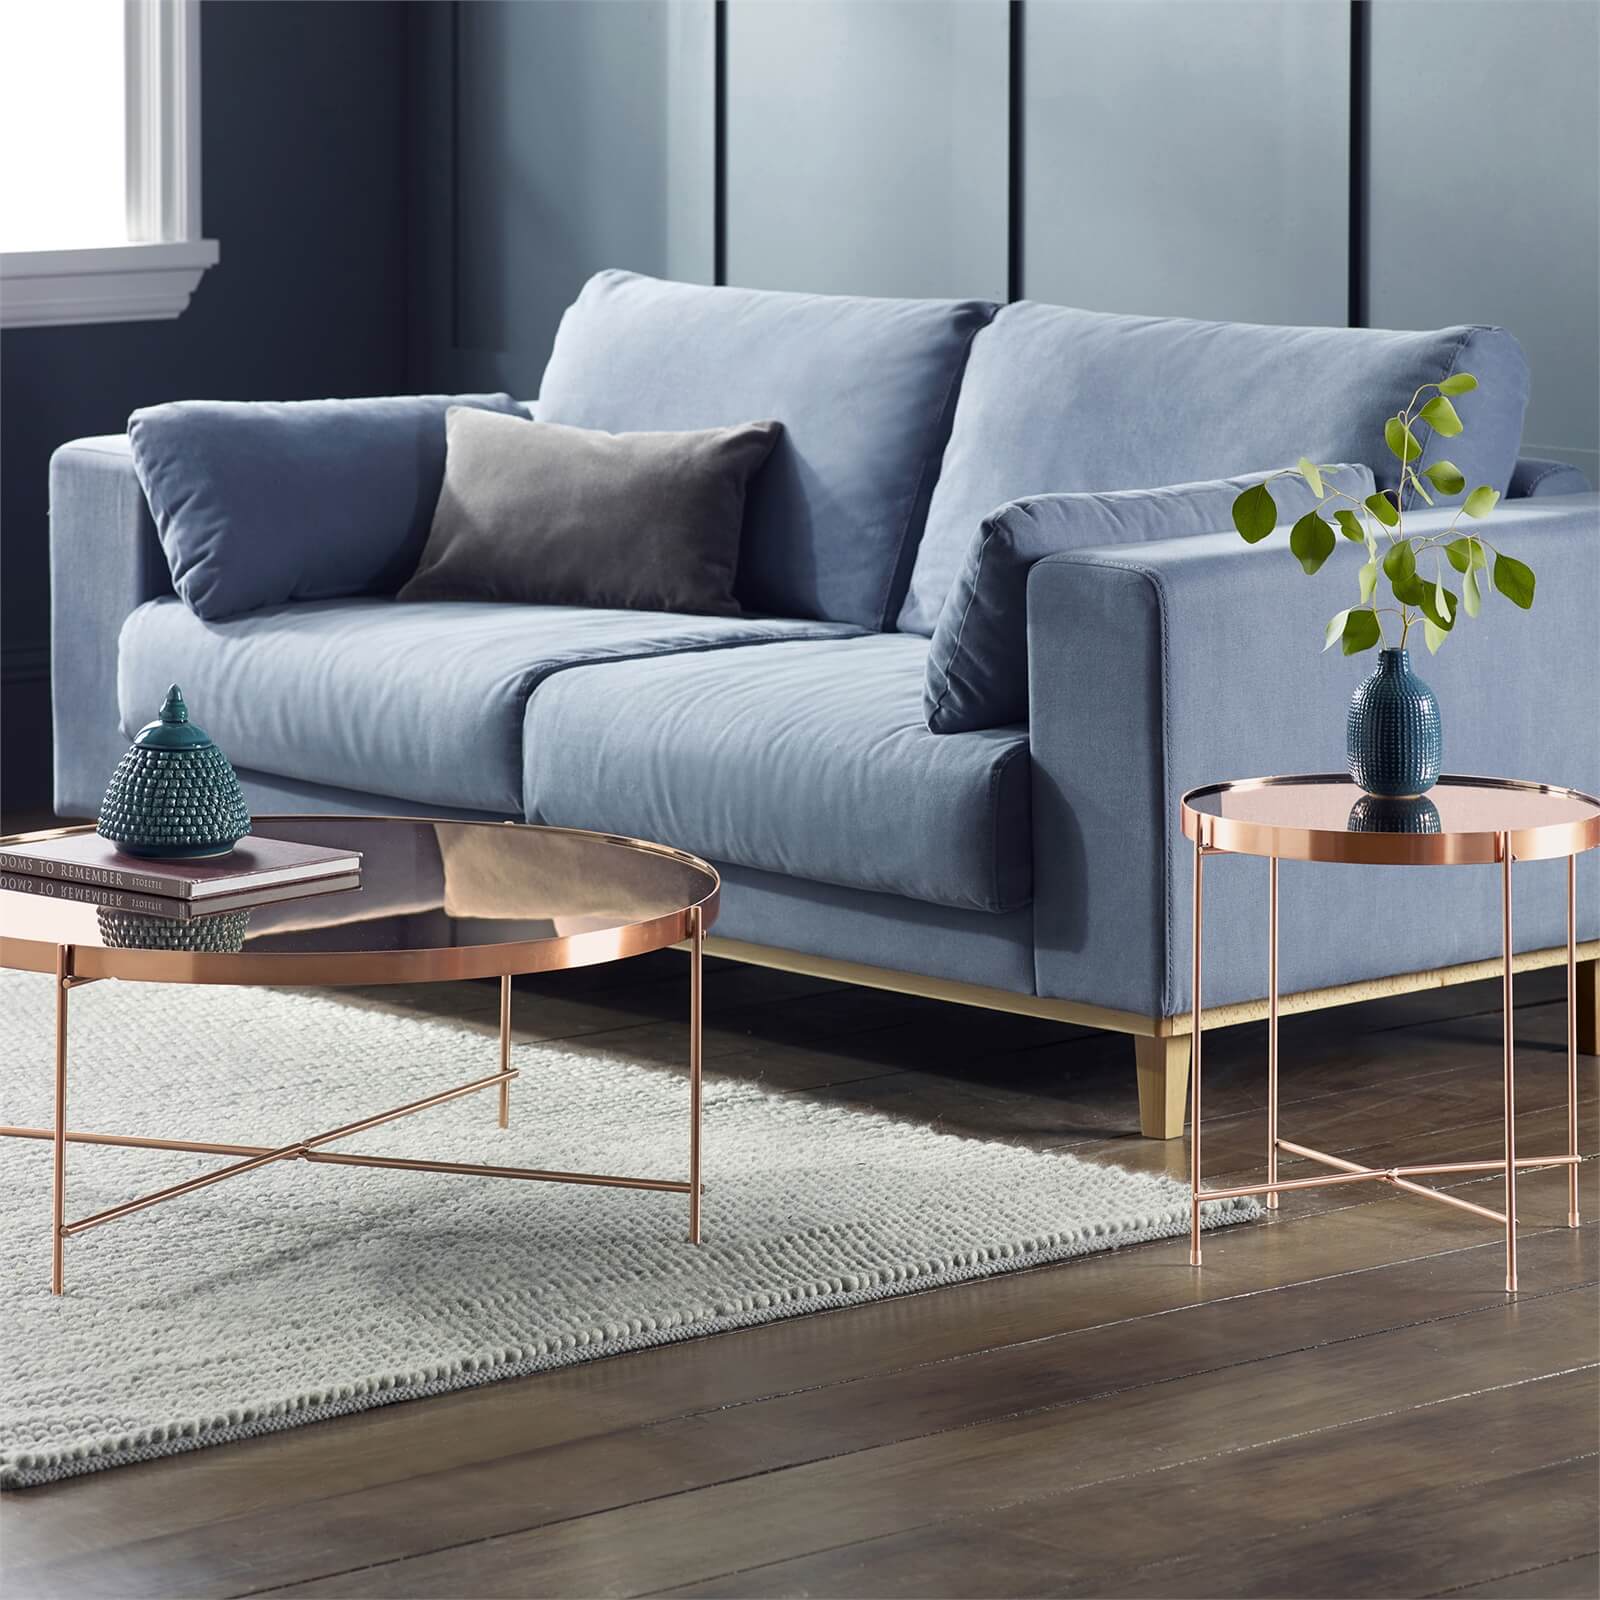 Oakland Coffee Table - Rose Gold